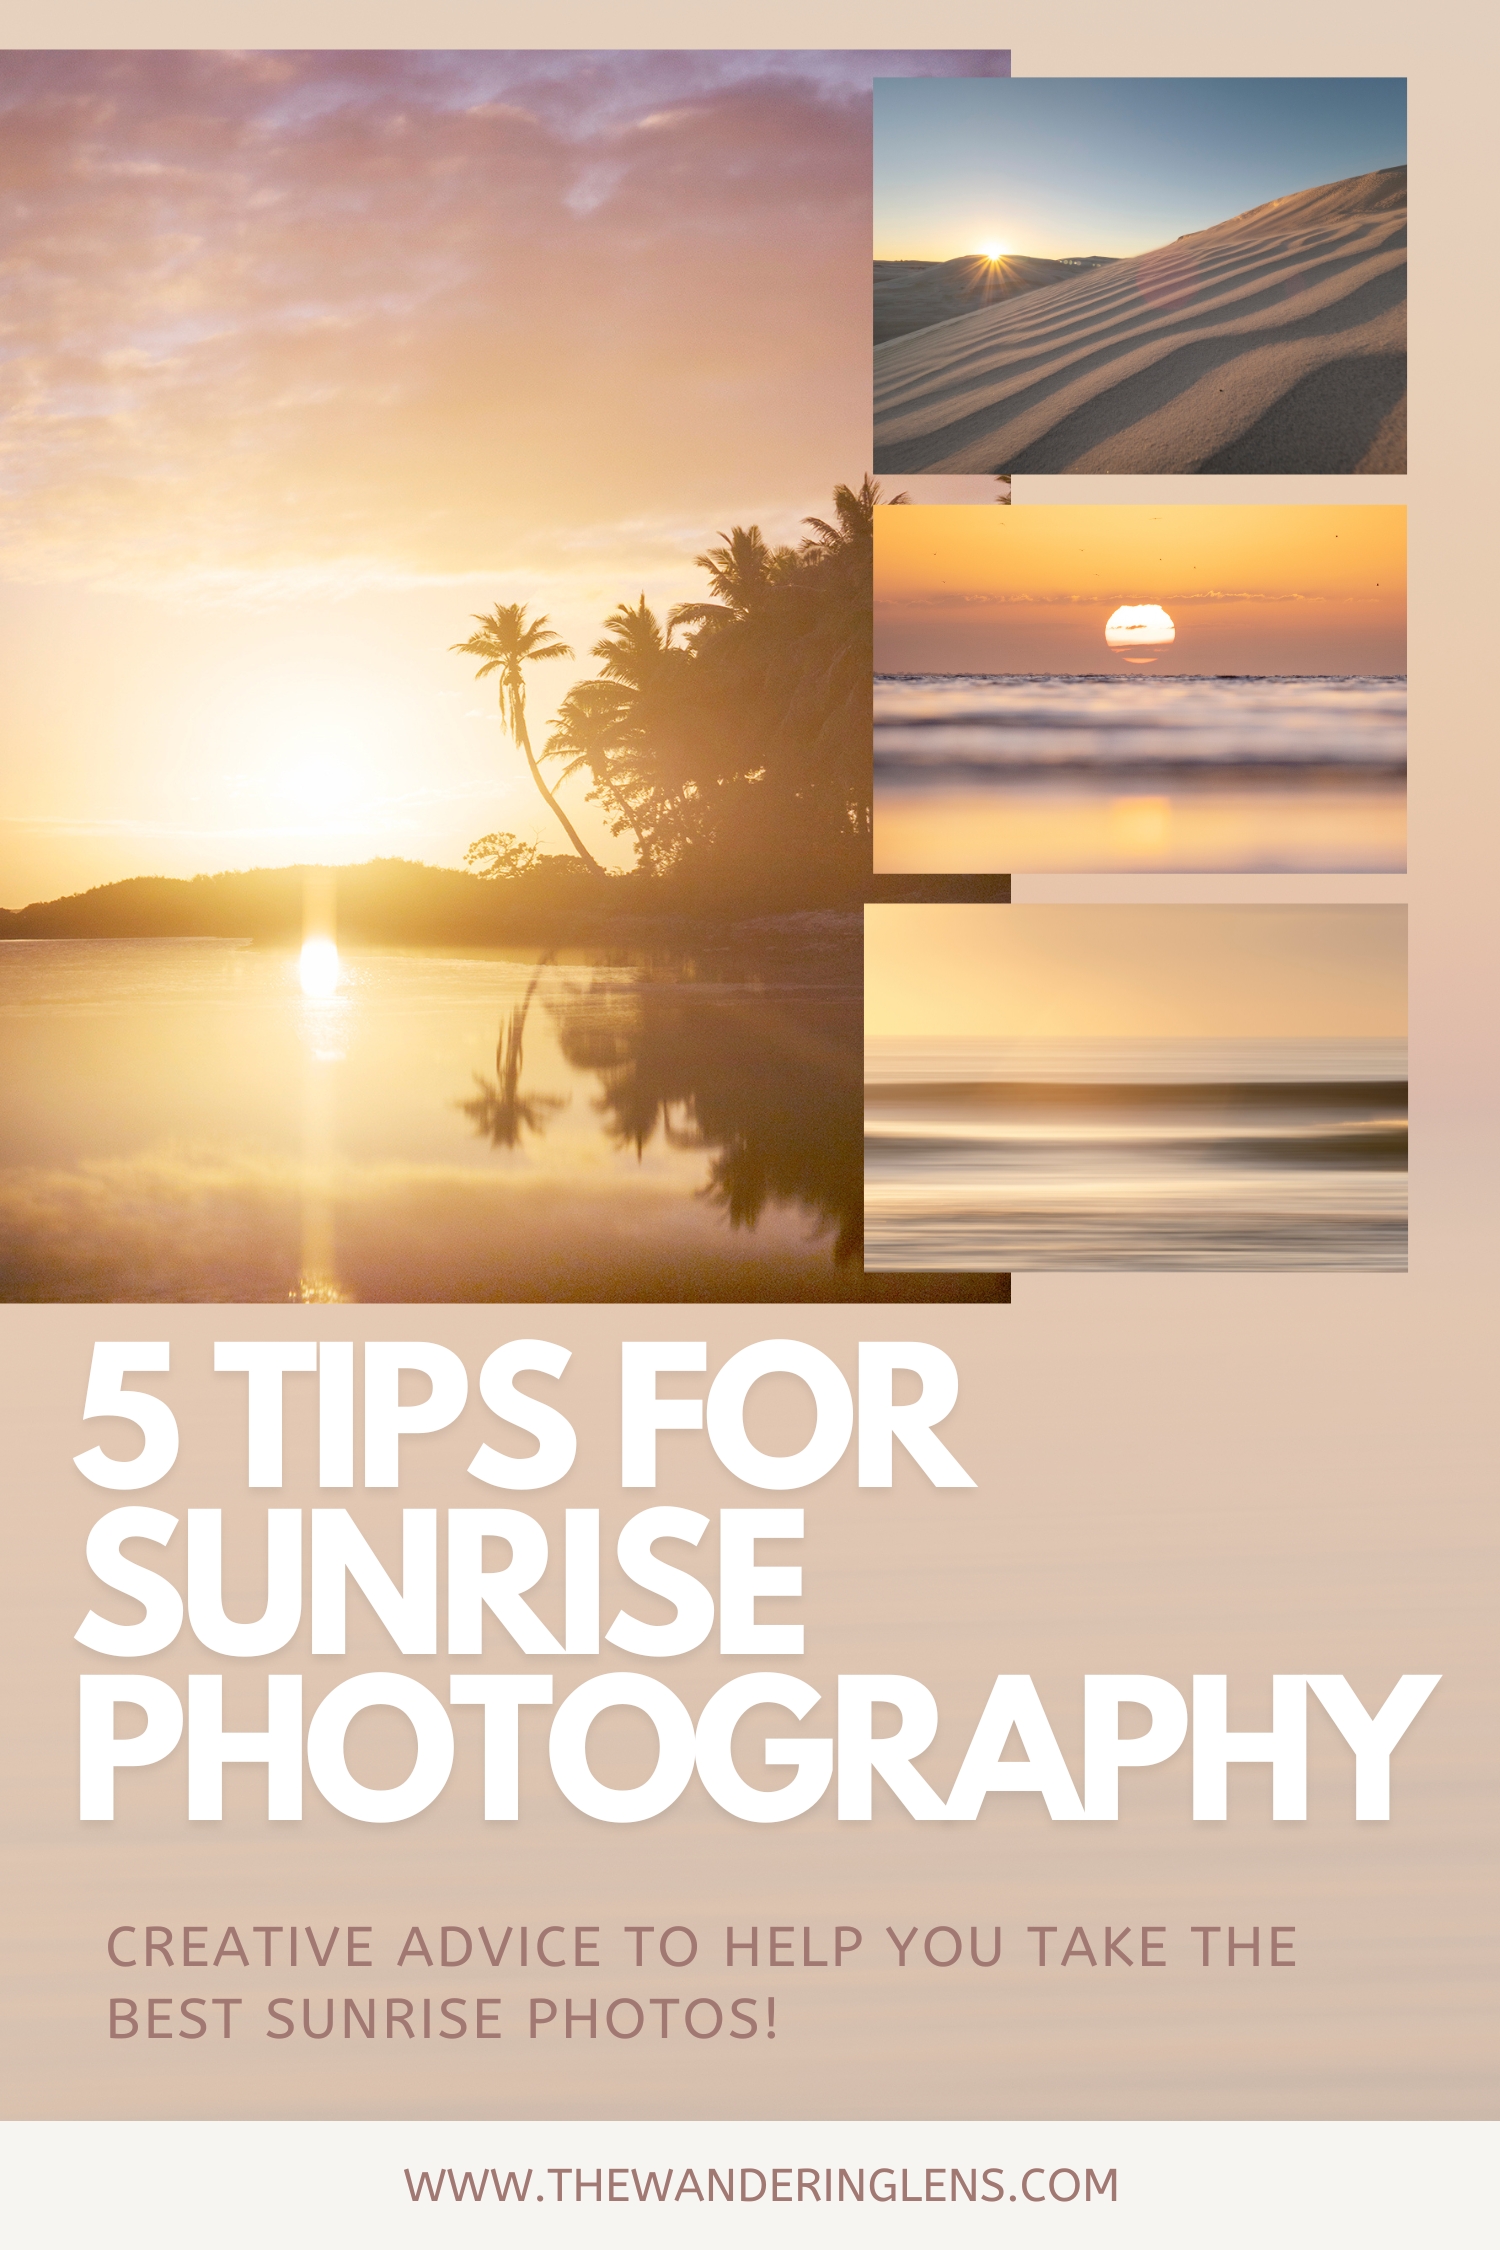 Sunrise Photography Tips for Landscape and Travel Photographers